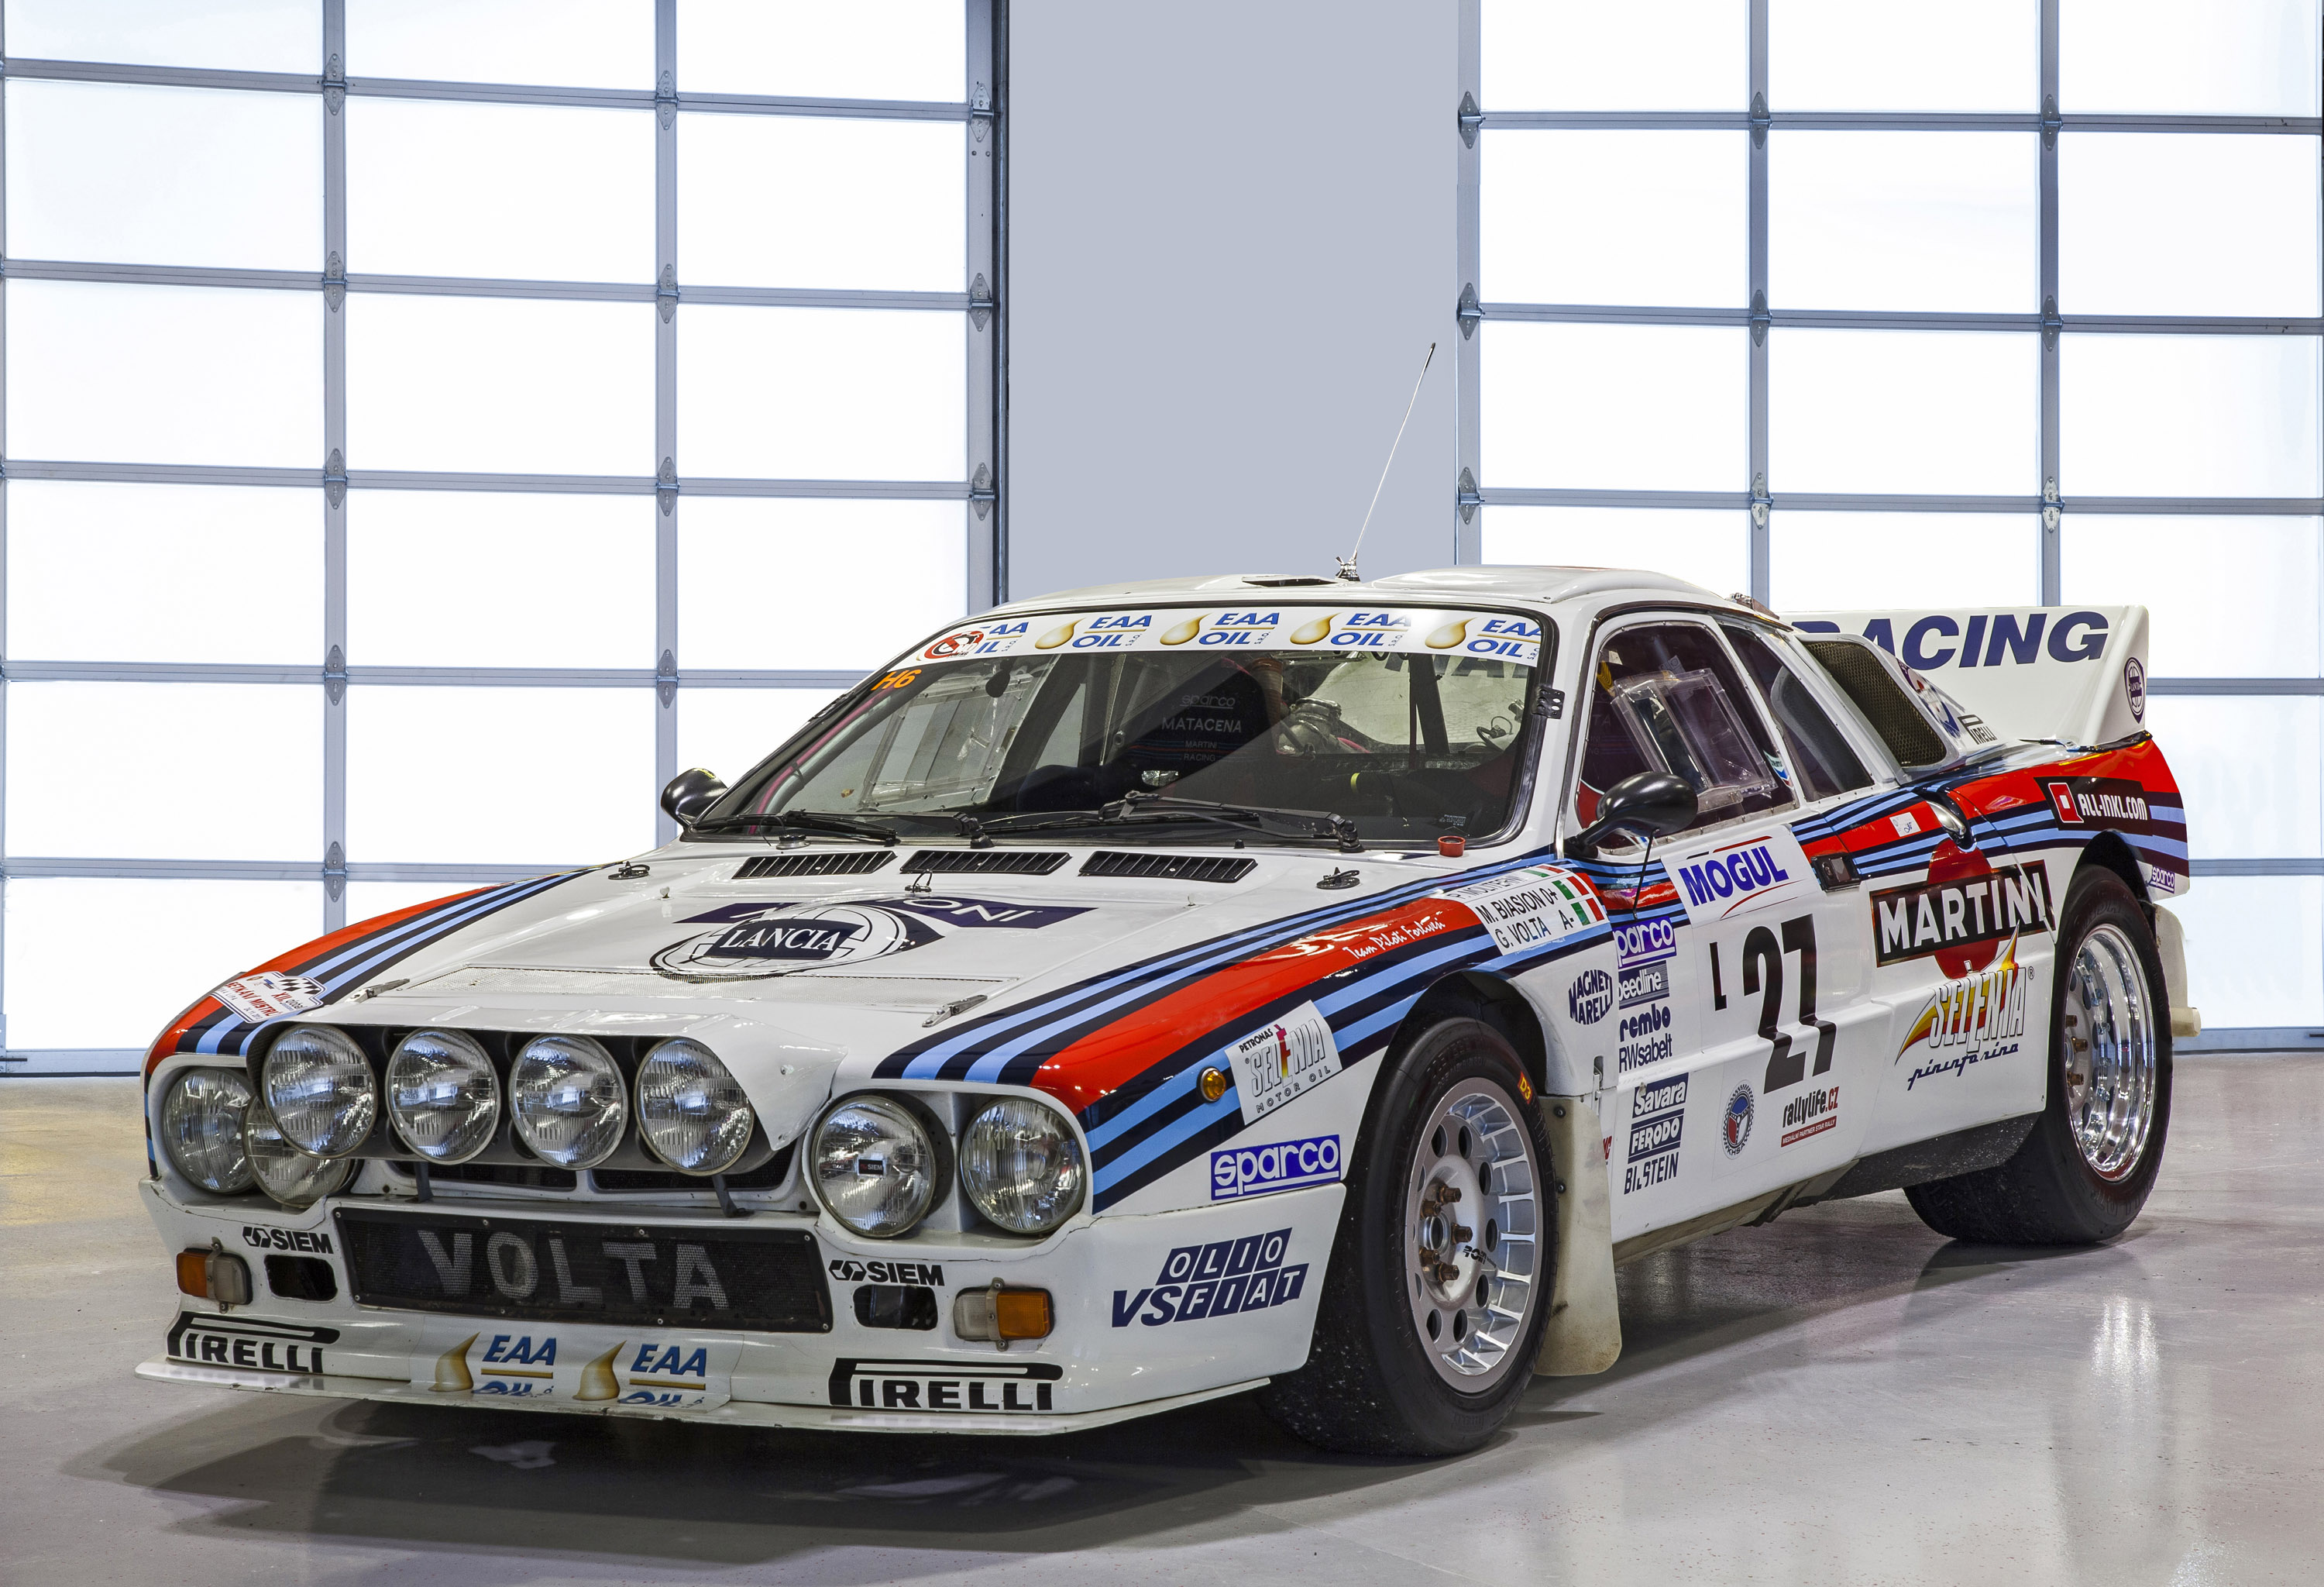 Amazing Lancia 037 Pictures & Backgrounds